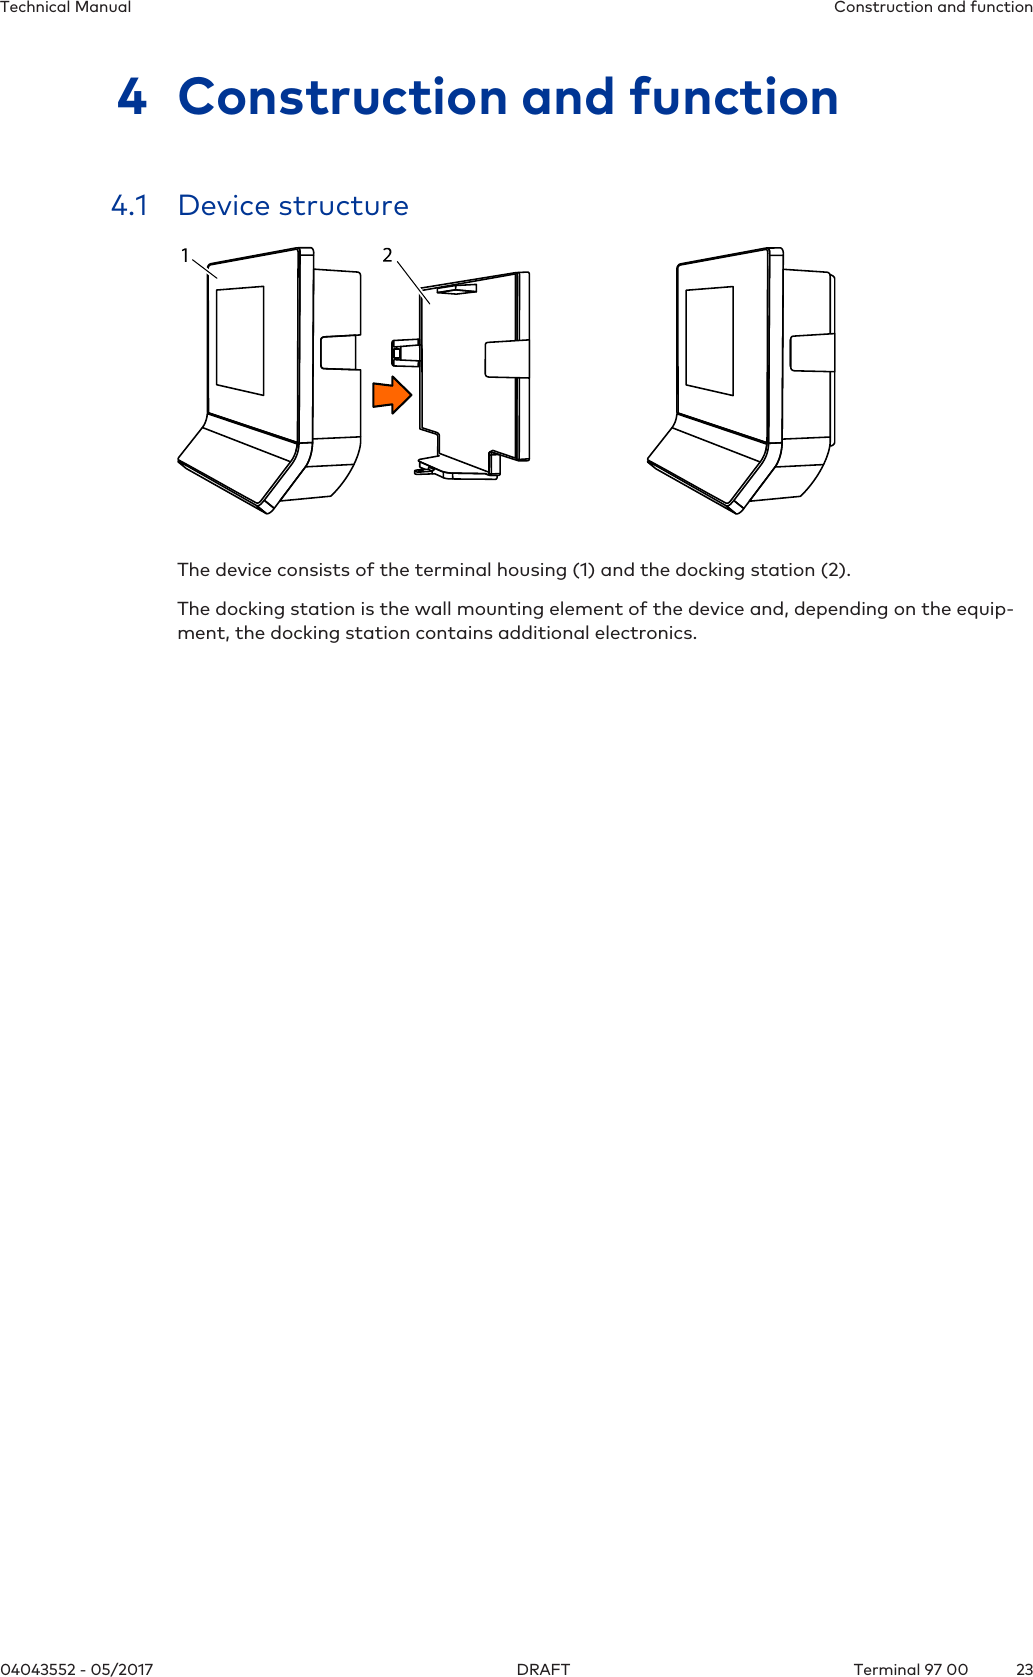 Construction and functionTechnical Manual2304043552 - 05/2017 Terminal 97 00DRAFT4 Construction and function4.1 Device structureThe device consists of the terminal housing (1) and the docking station (2).The docking station is the wall mounting element of the device and, depending on the equip-ment, the docking station contains additional electronics.